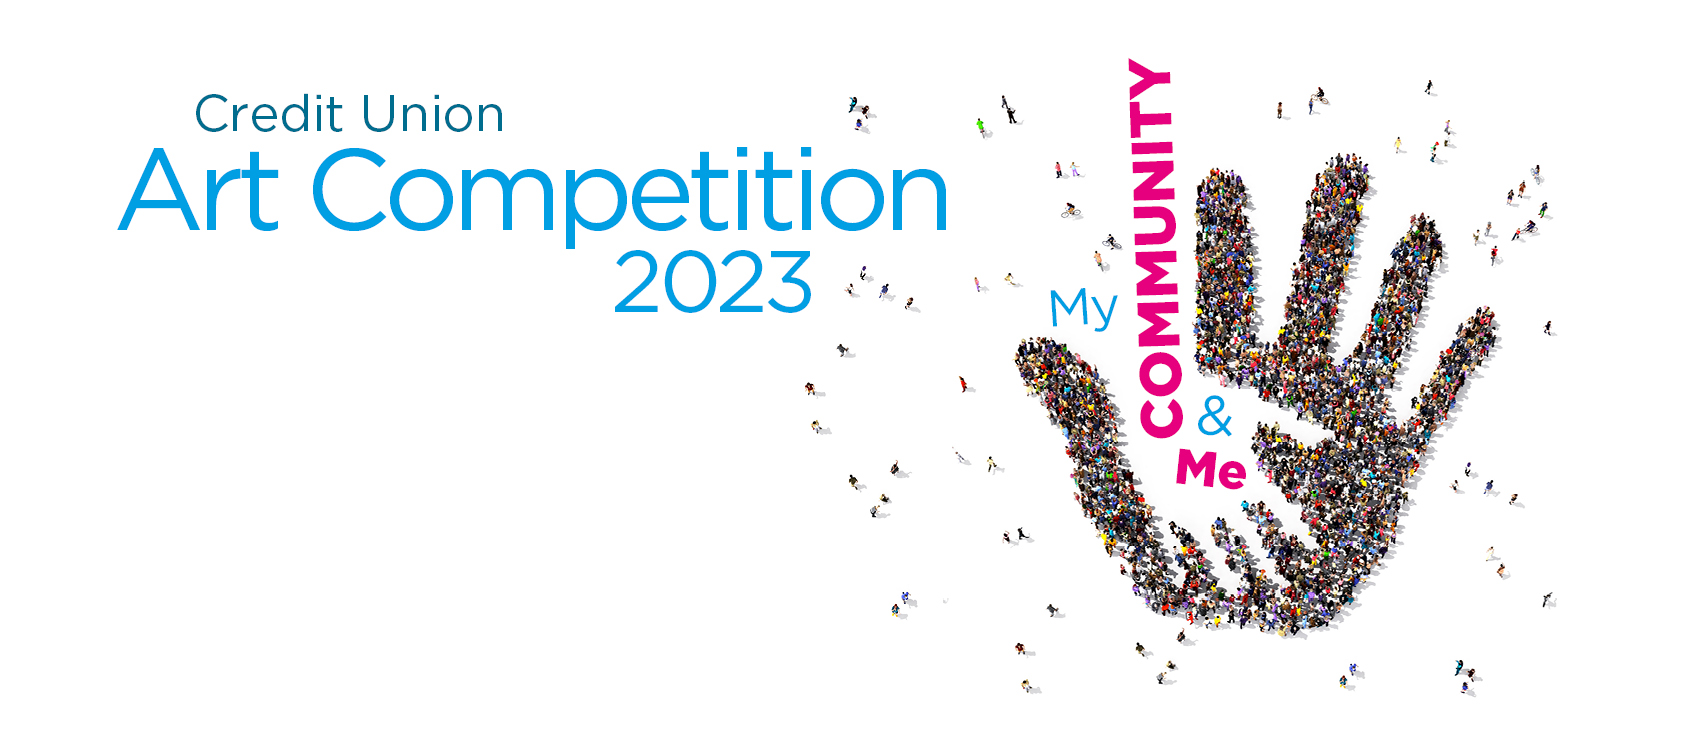 2023 Credit Union Art Competition - "My Community & Me"